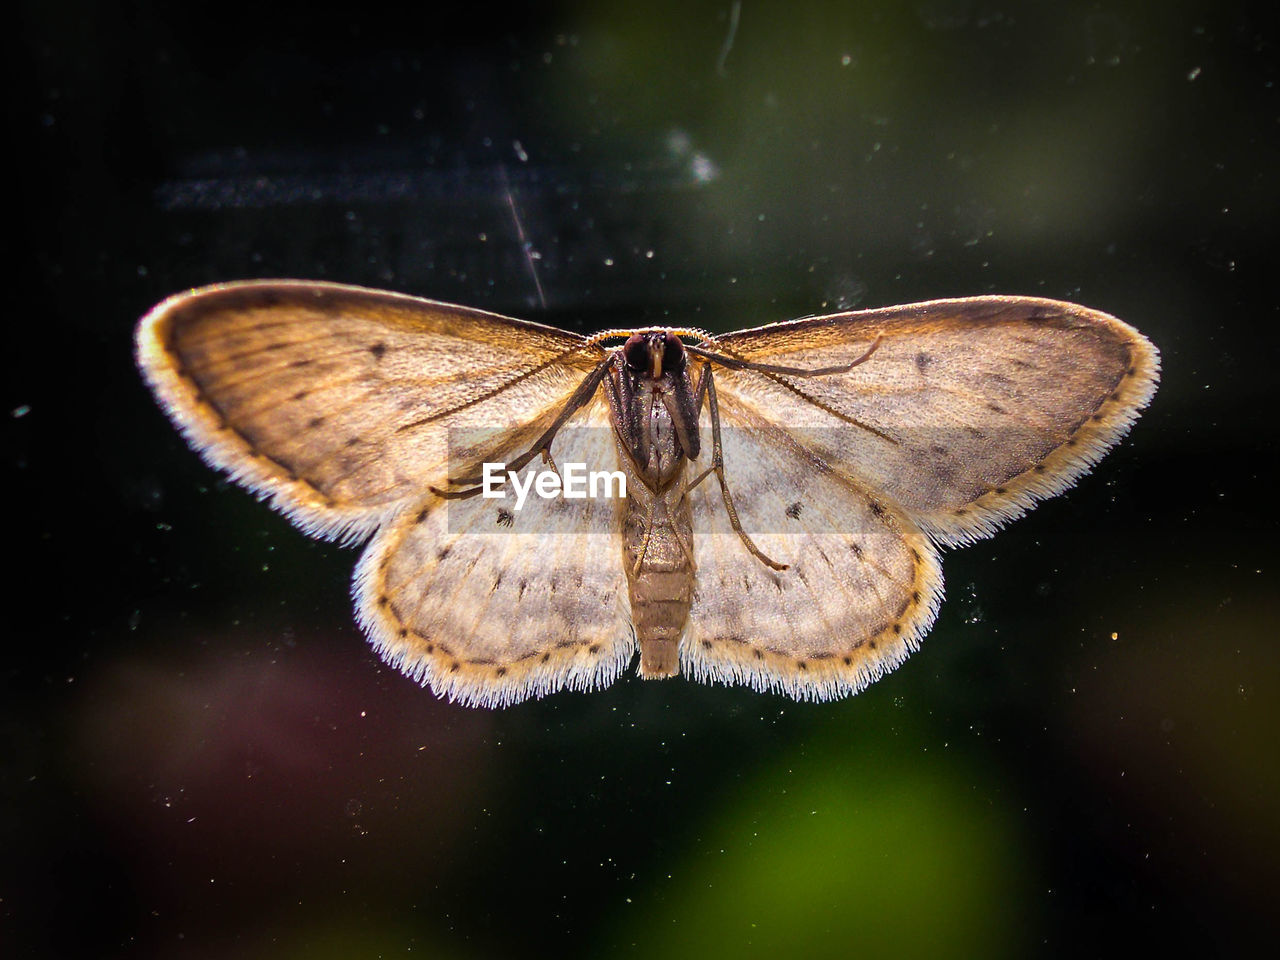 Close-up of moth against blurred background